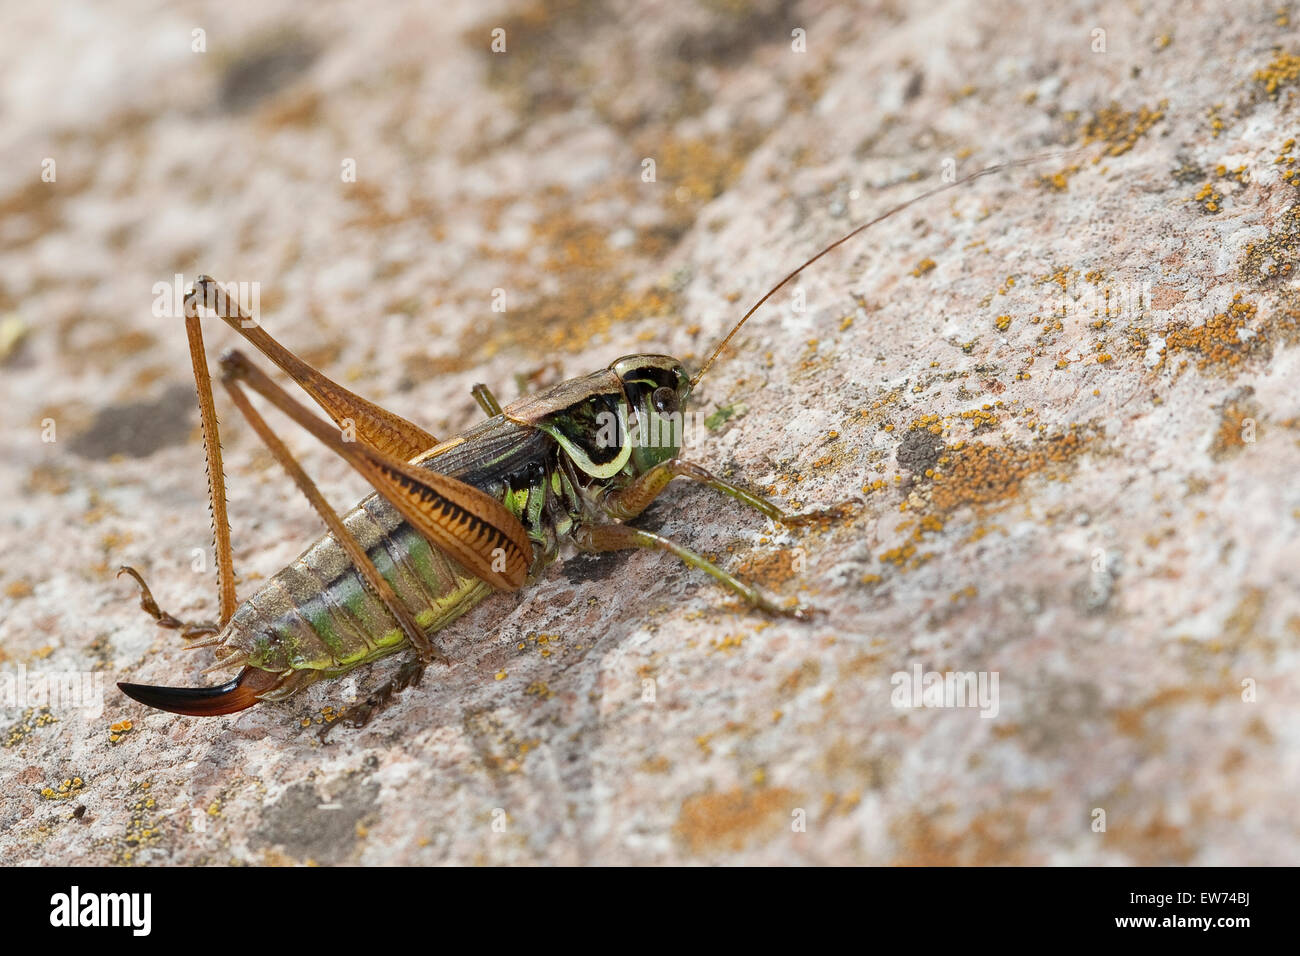 Roesel's bush cricket, Roesels Rösels Beißschrecke Beißschrecke, Roesels Beissschrecke, Weibchen, Metrioptera roeselii, Banque D'Images